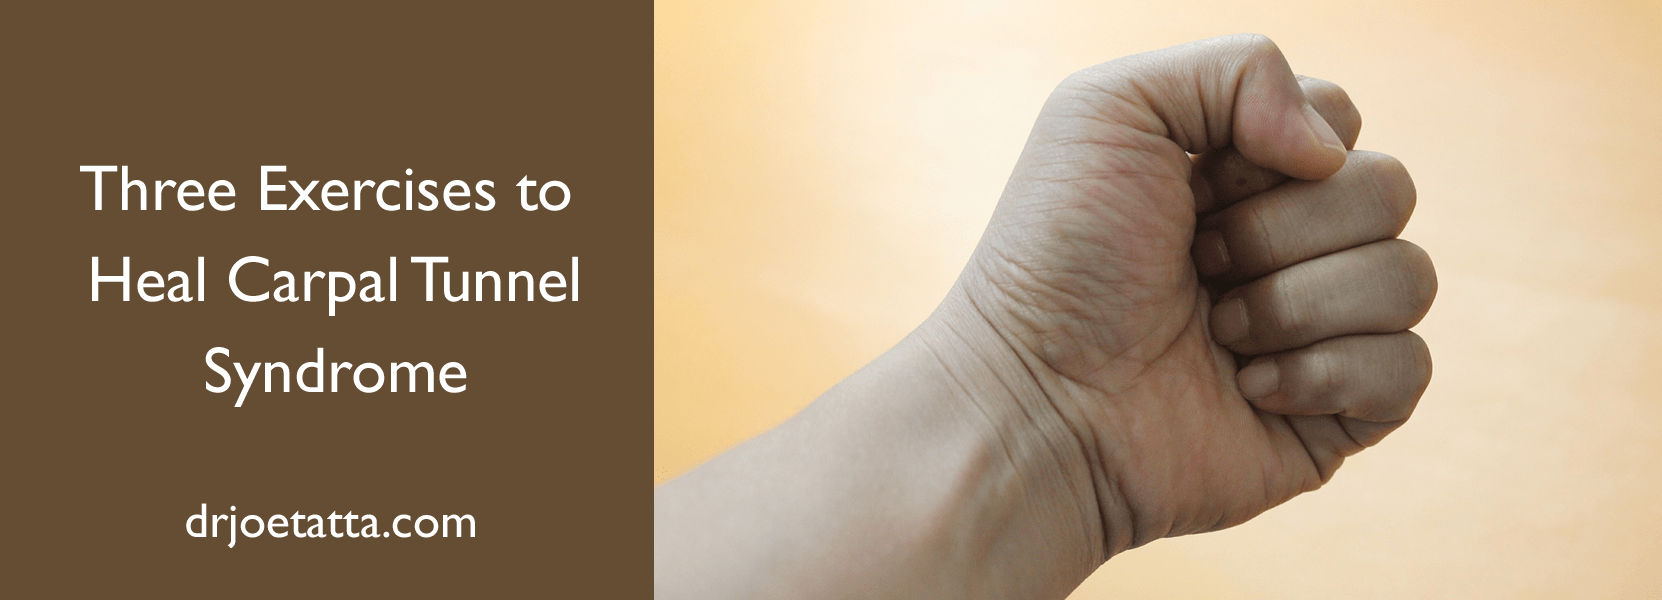 Three Exercise to Heal Carpal Tunnel Syndrome